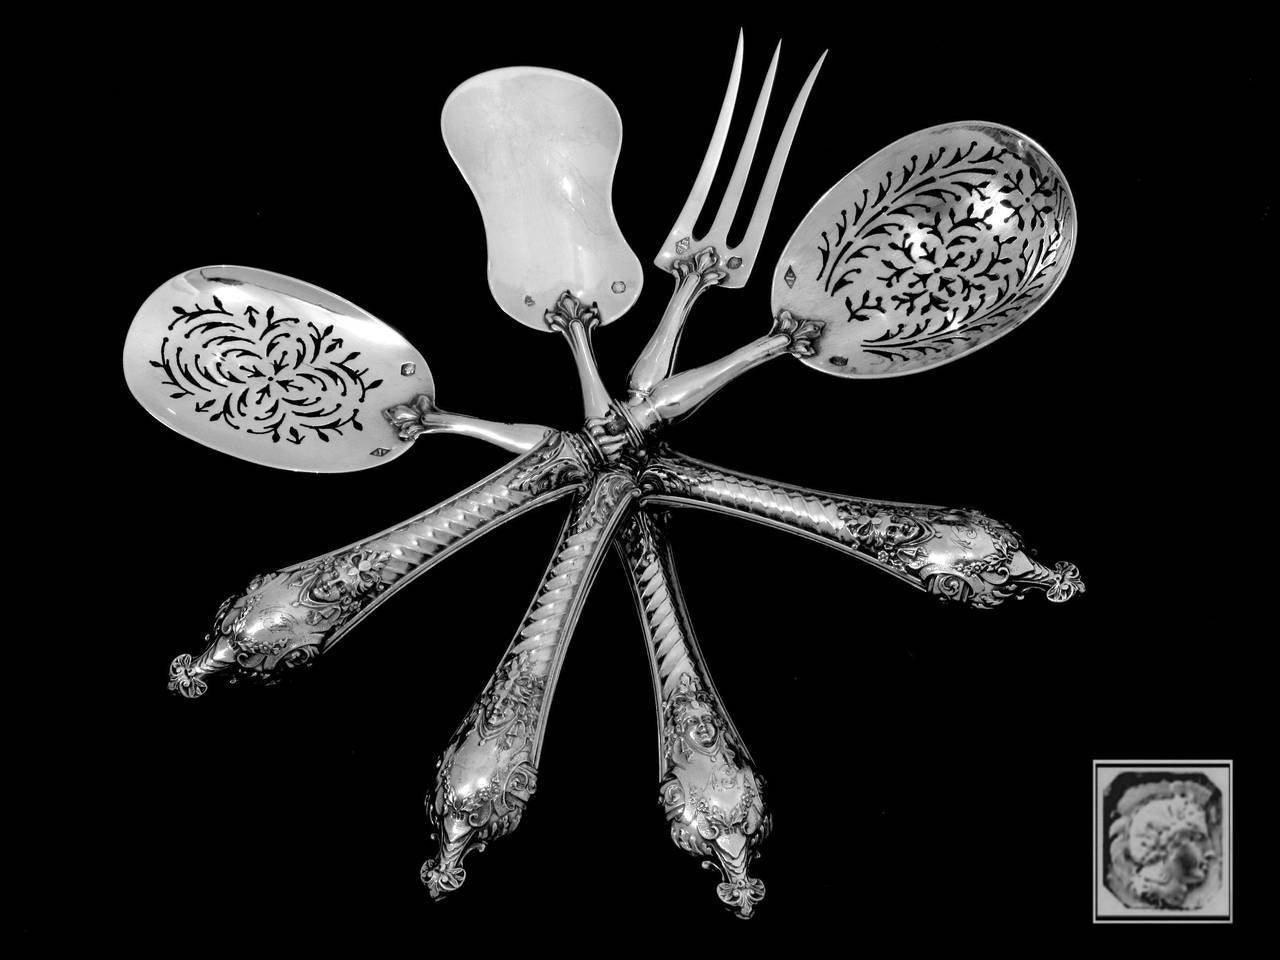 Gorgeous French All Sterling Silver Dessert Hors d'Oeuvre Set 4 pc Mascarons 2